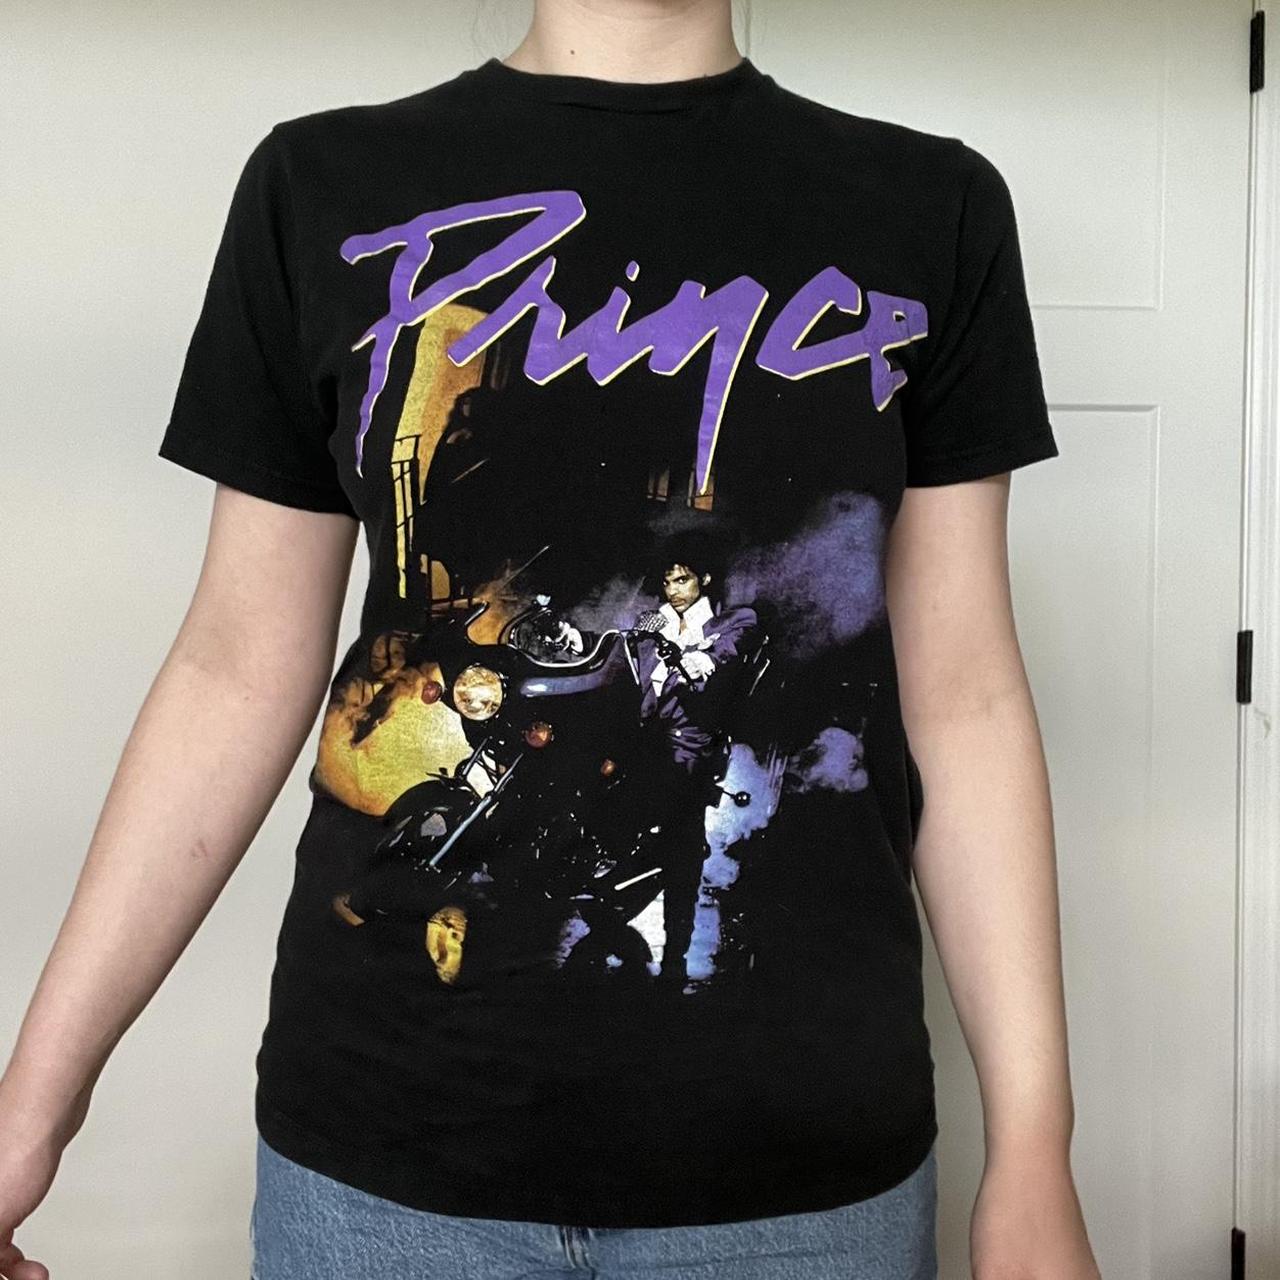 Product Image 2 - PRINCE GRAPHIC TEE

Brand: Prince
Size: Medium
Details: